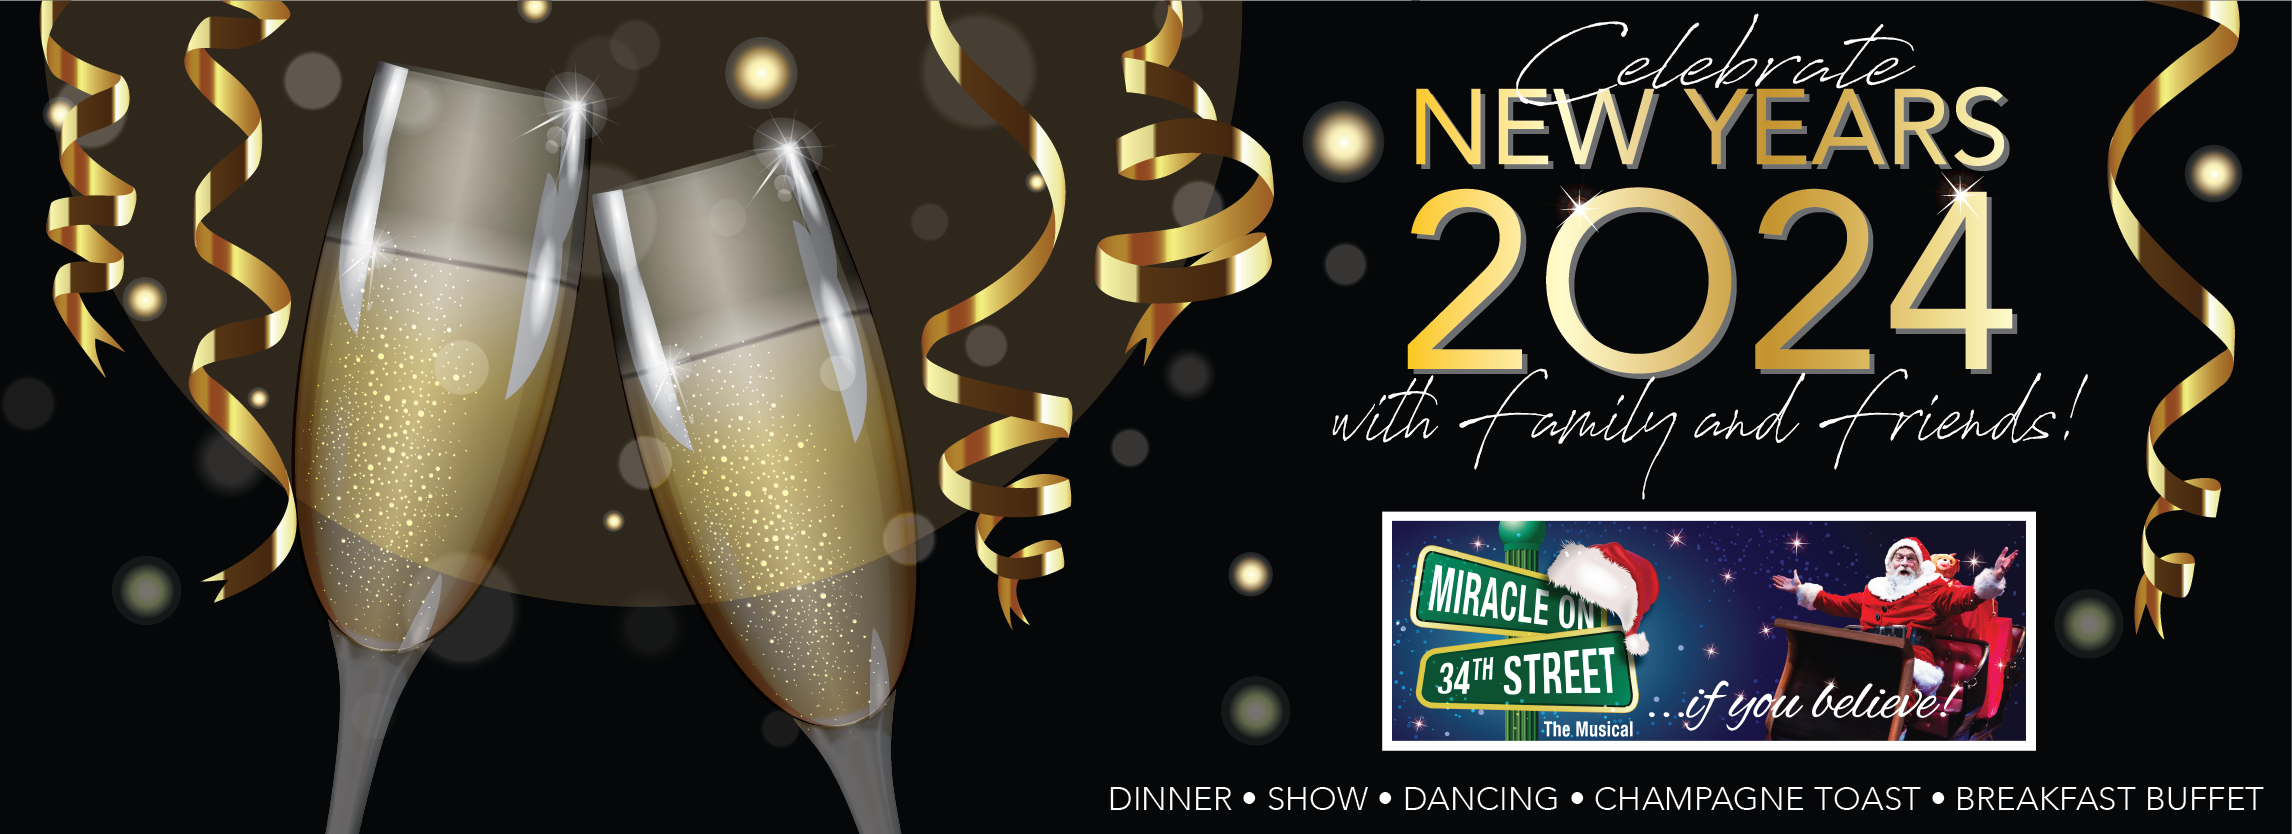 Toby's New Years Eve Event - Toby's Dinner Theatre